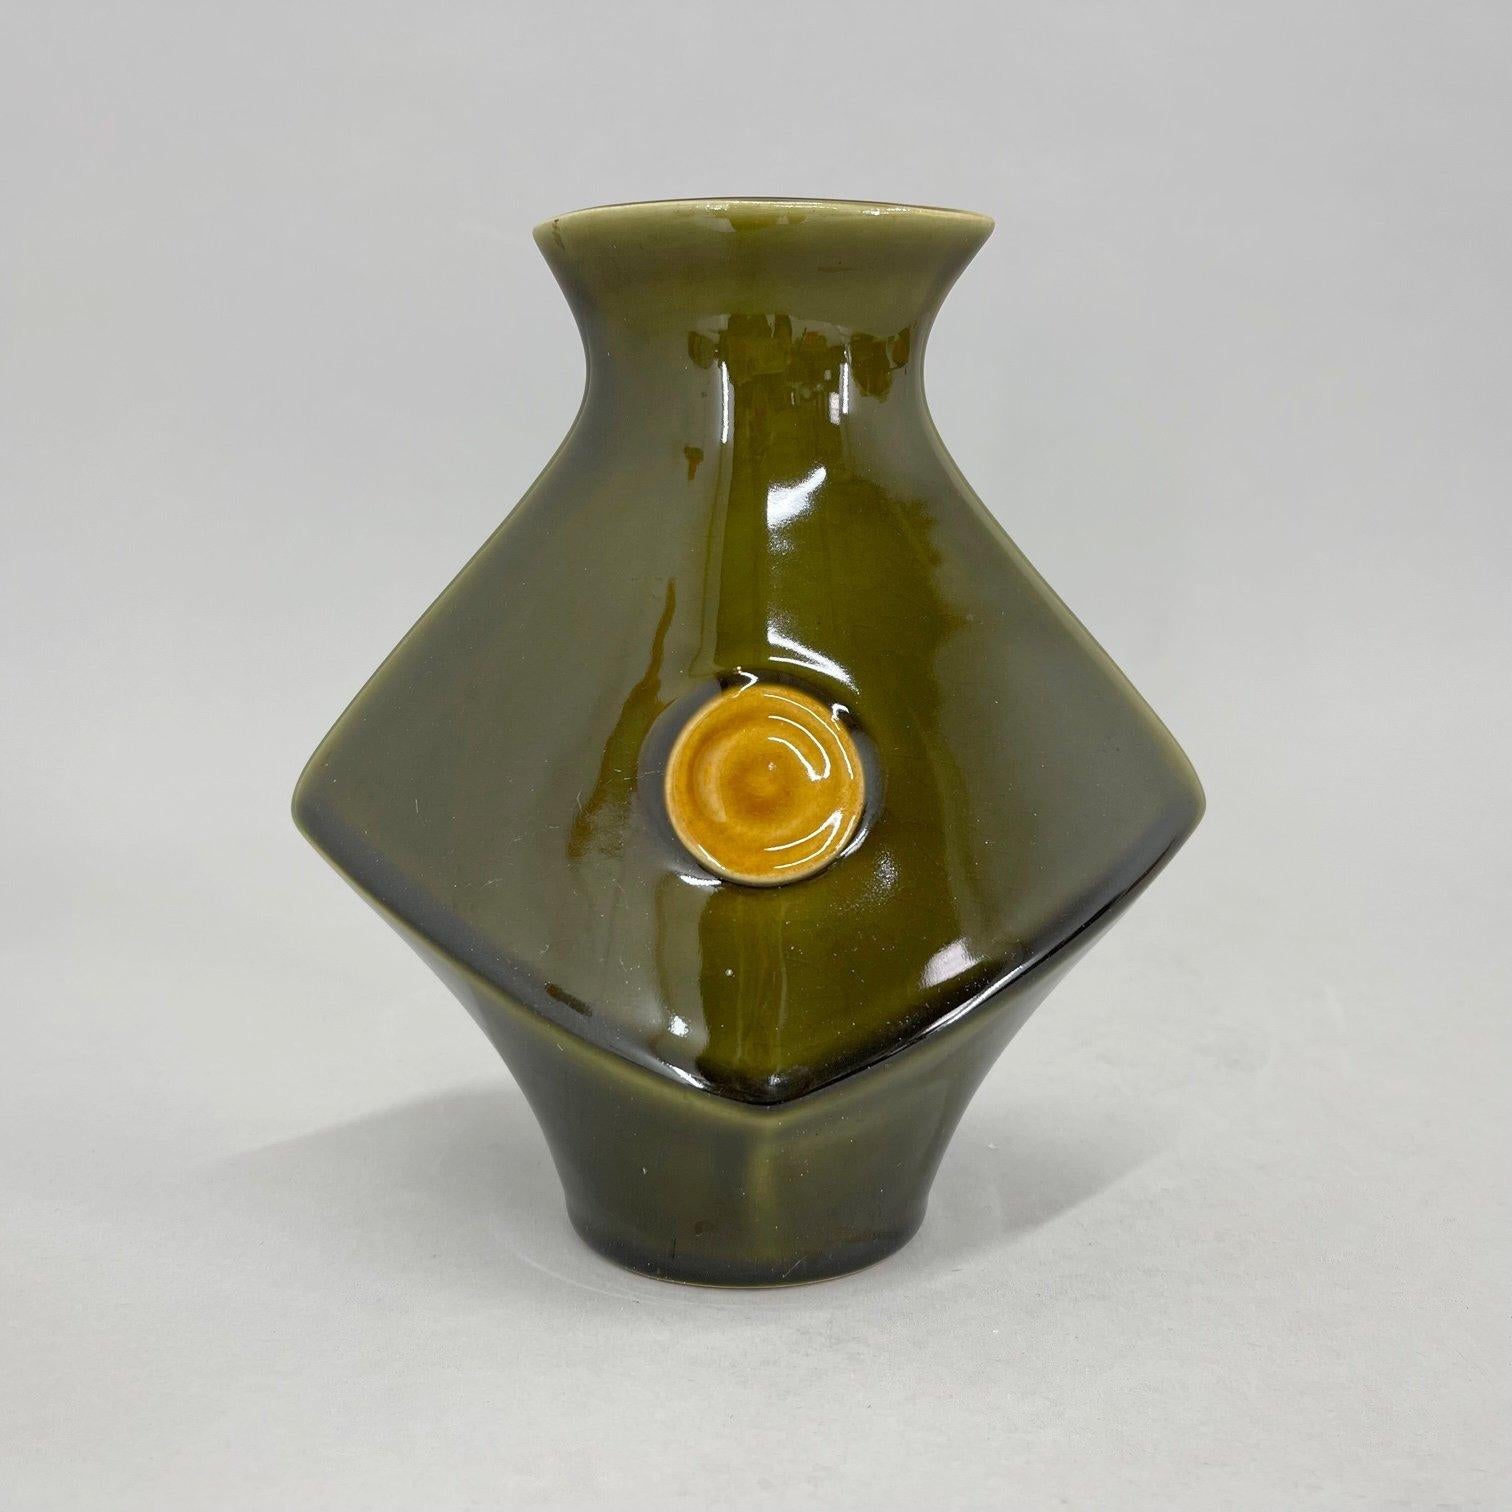 Vintage vase made by Ditmar Urbach in Czechoslovakia in 1970's. Very good vintage condition.